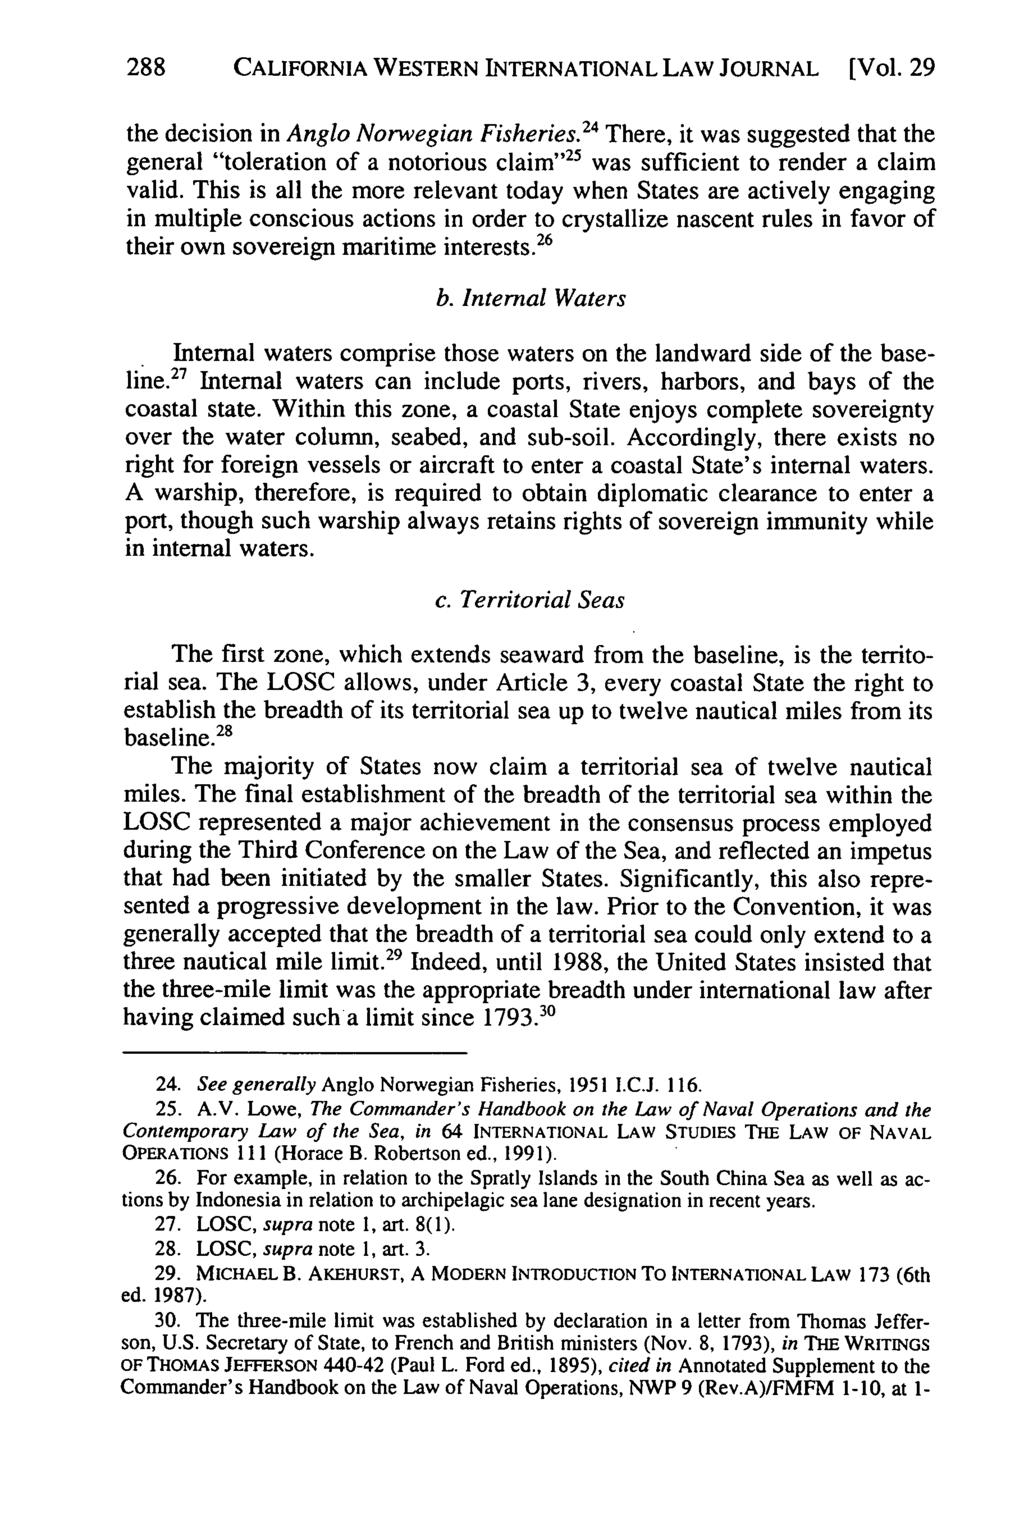 288 California CALIFORNIA Western International WESTERN Law INTERNATIONAL Journal, Vol. 29 [1998], No. 2, Art. 3 LAW JOURNAL [Vol. 29 the decision in Anglo Norwegian Fisheries.